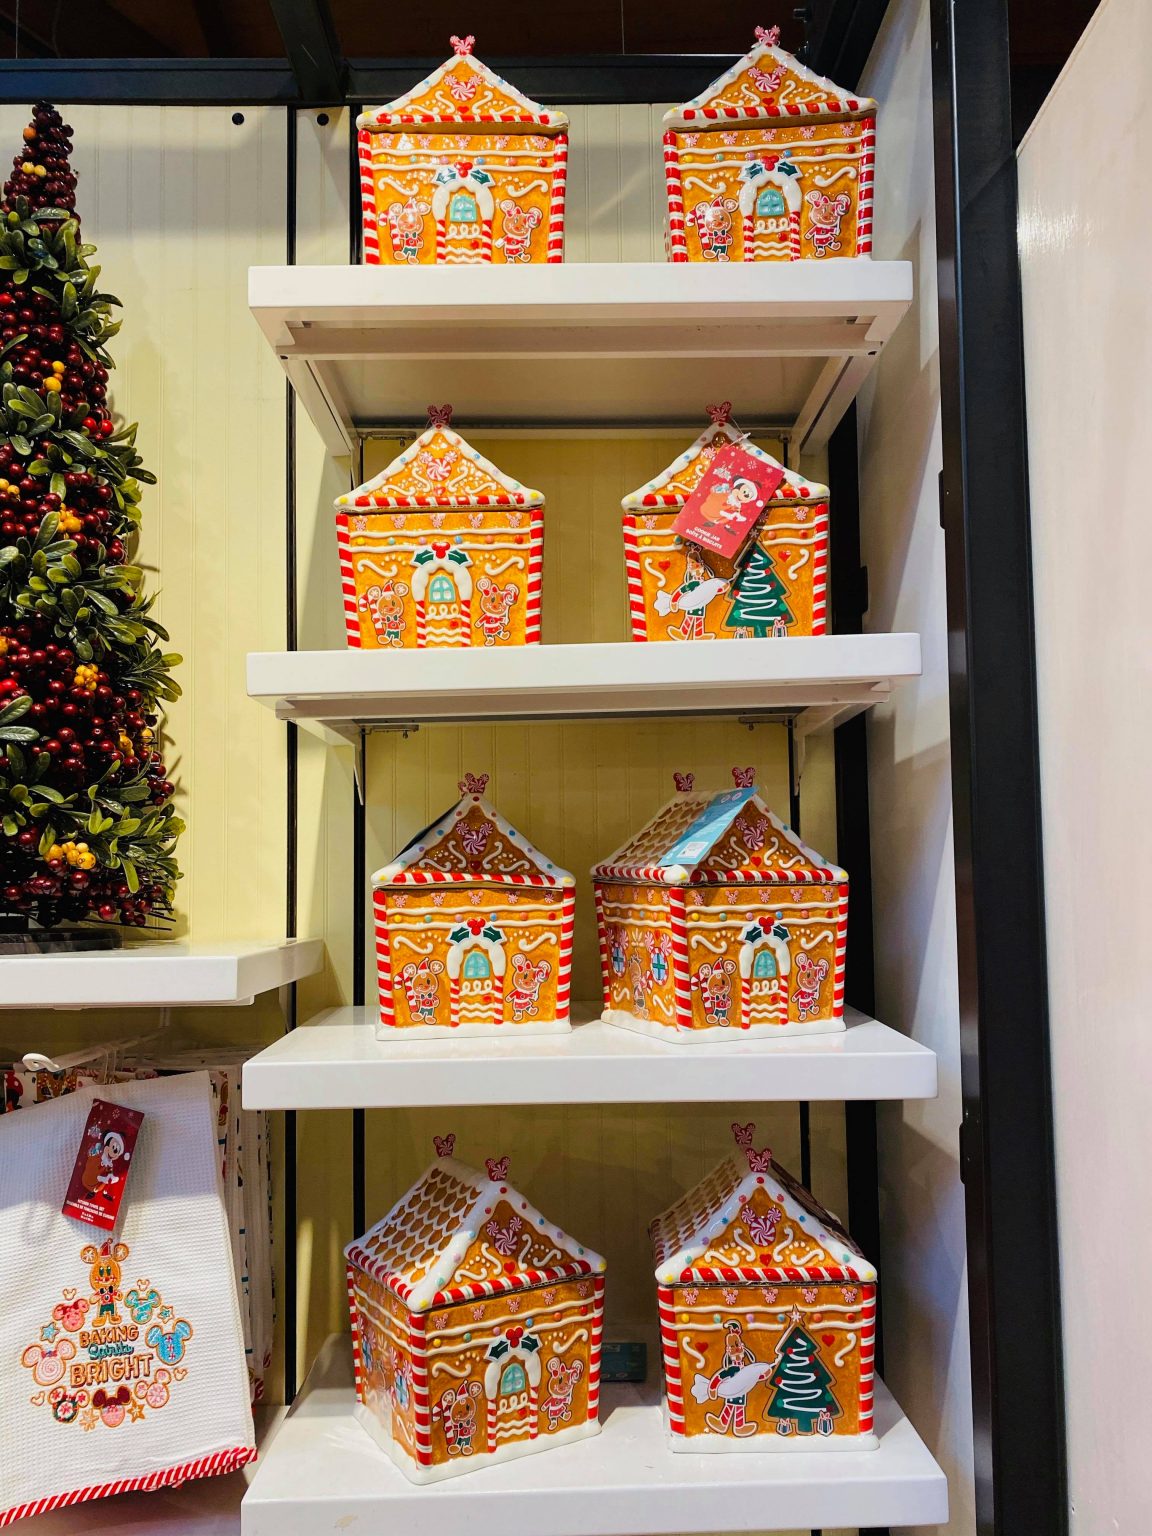 Disney Gingerbread House is Too Sweet to Eat! Disney Fashion Blog